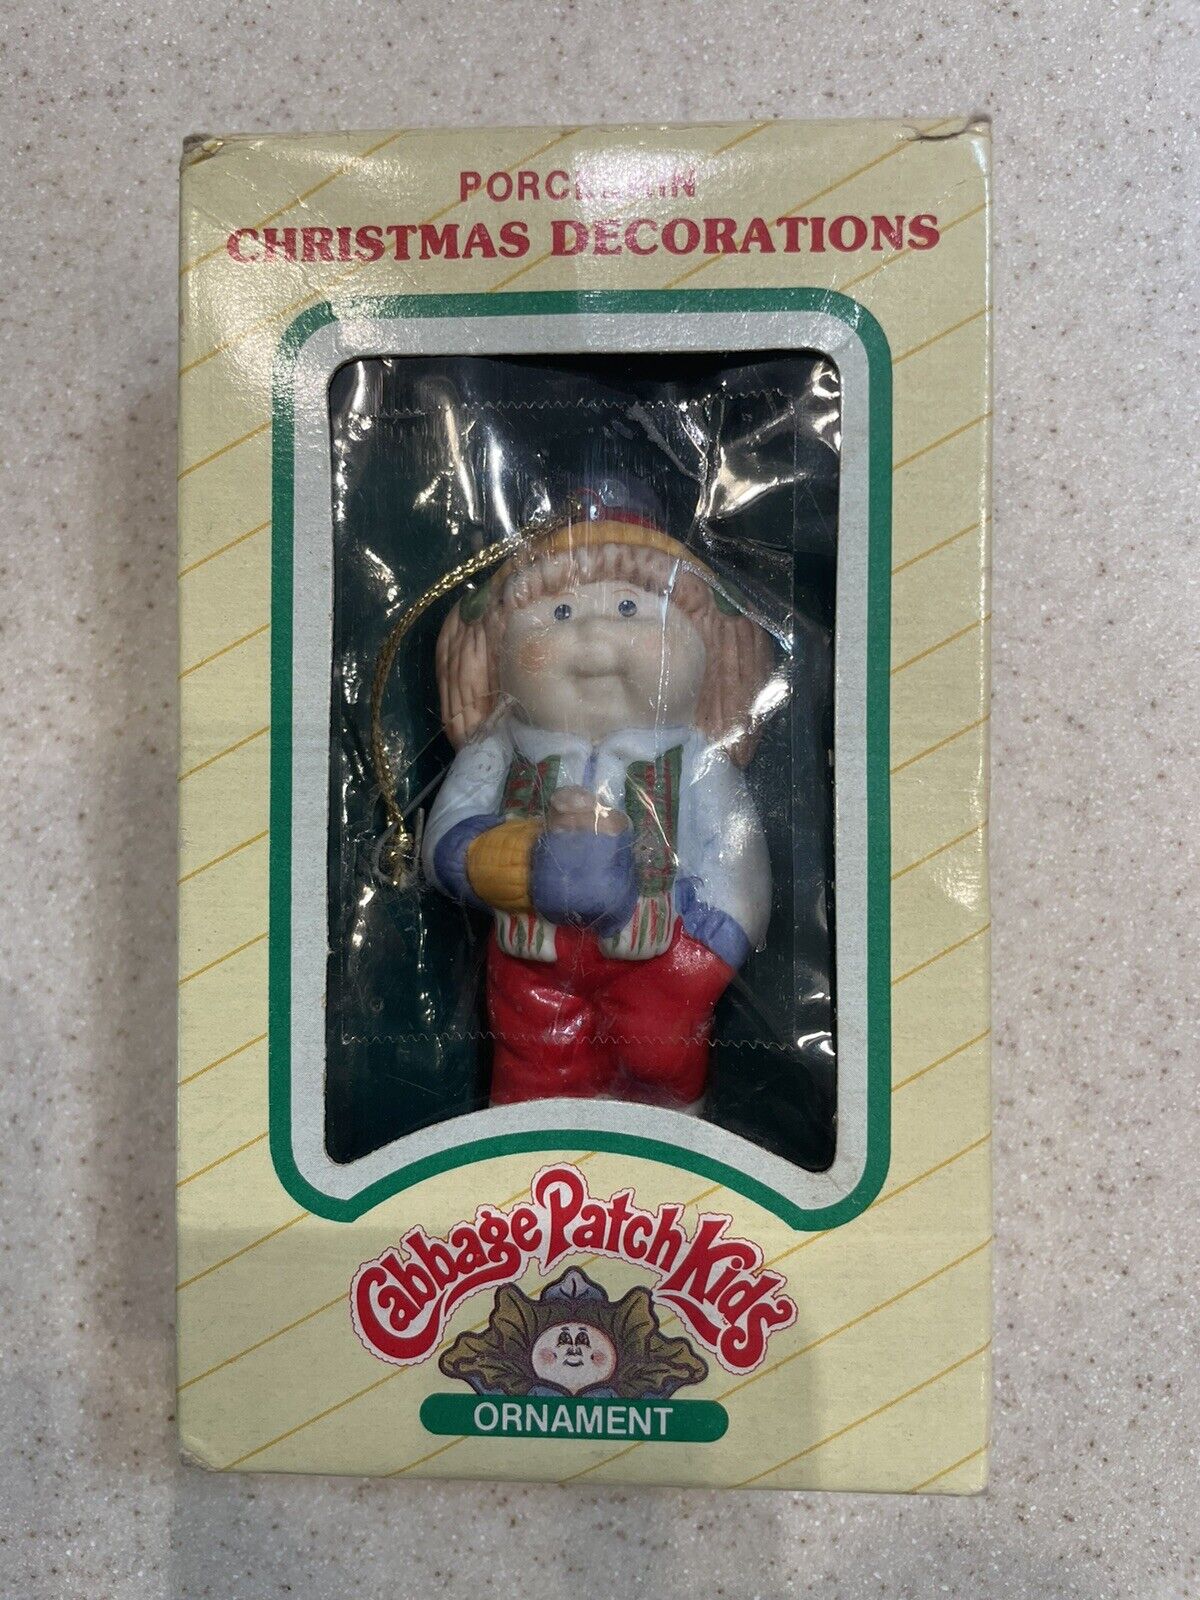 Cabbage Patch Kids Christmas Ornament Porcelain Girl W/Ponytails w/Hot Cocoa VTG